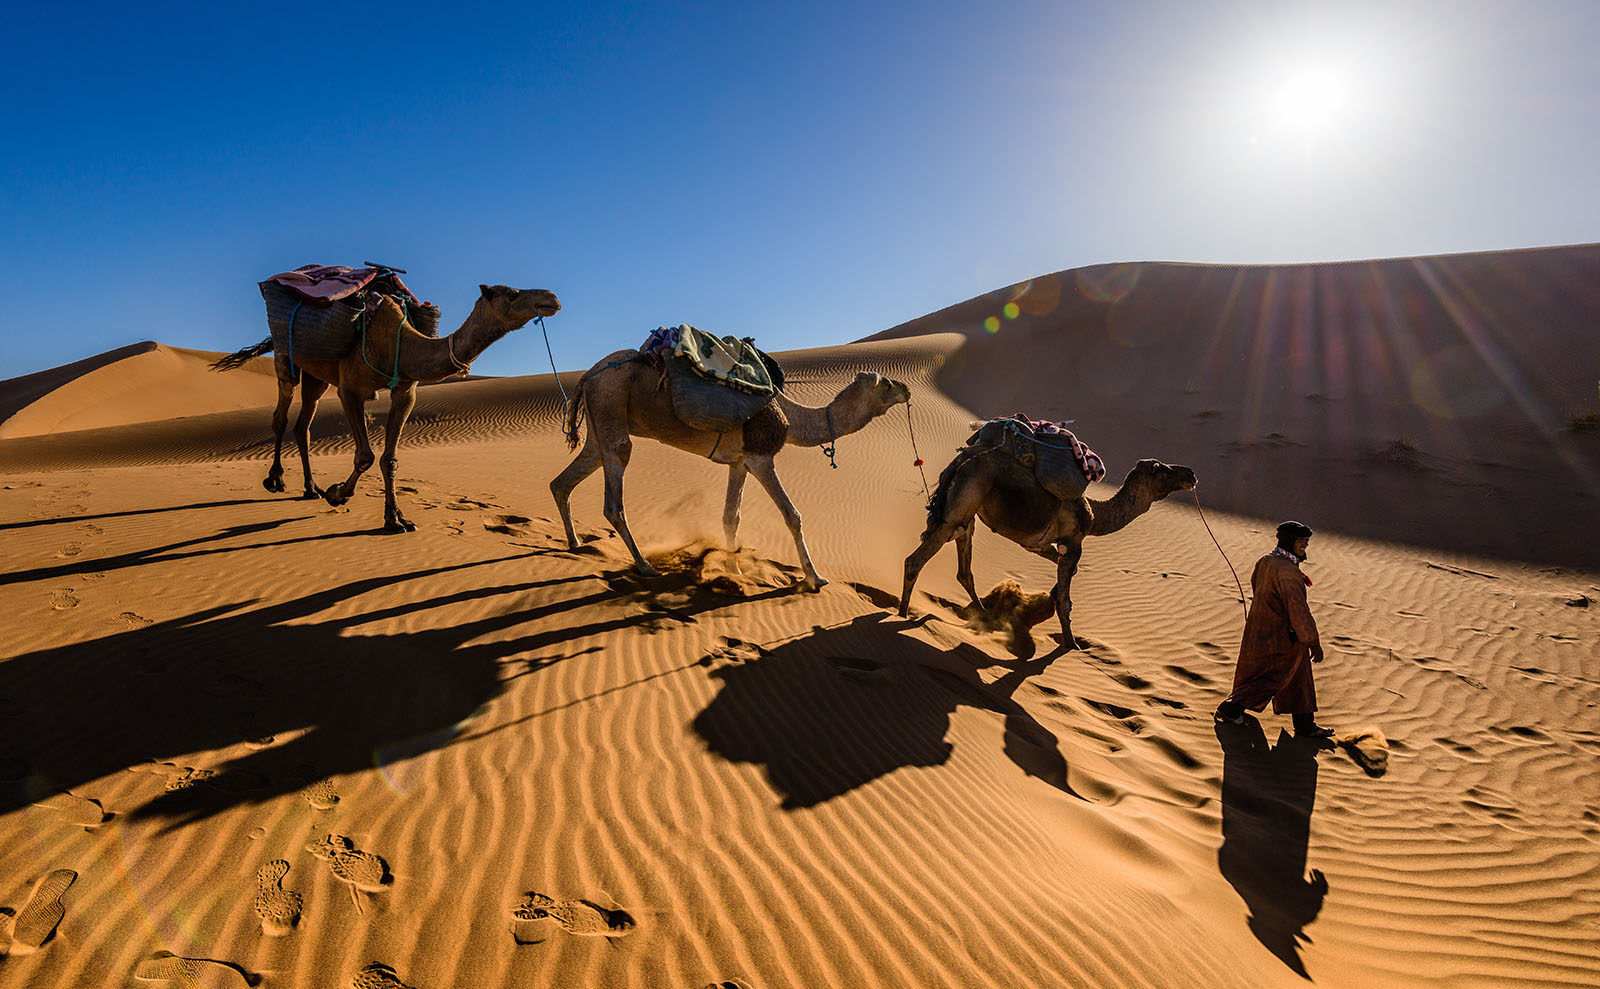 SSoP Podcast Episode 07 — Morocco: Couscous, Camels, and the Kasbah